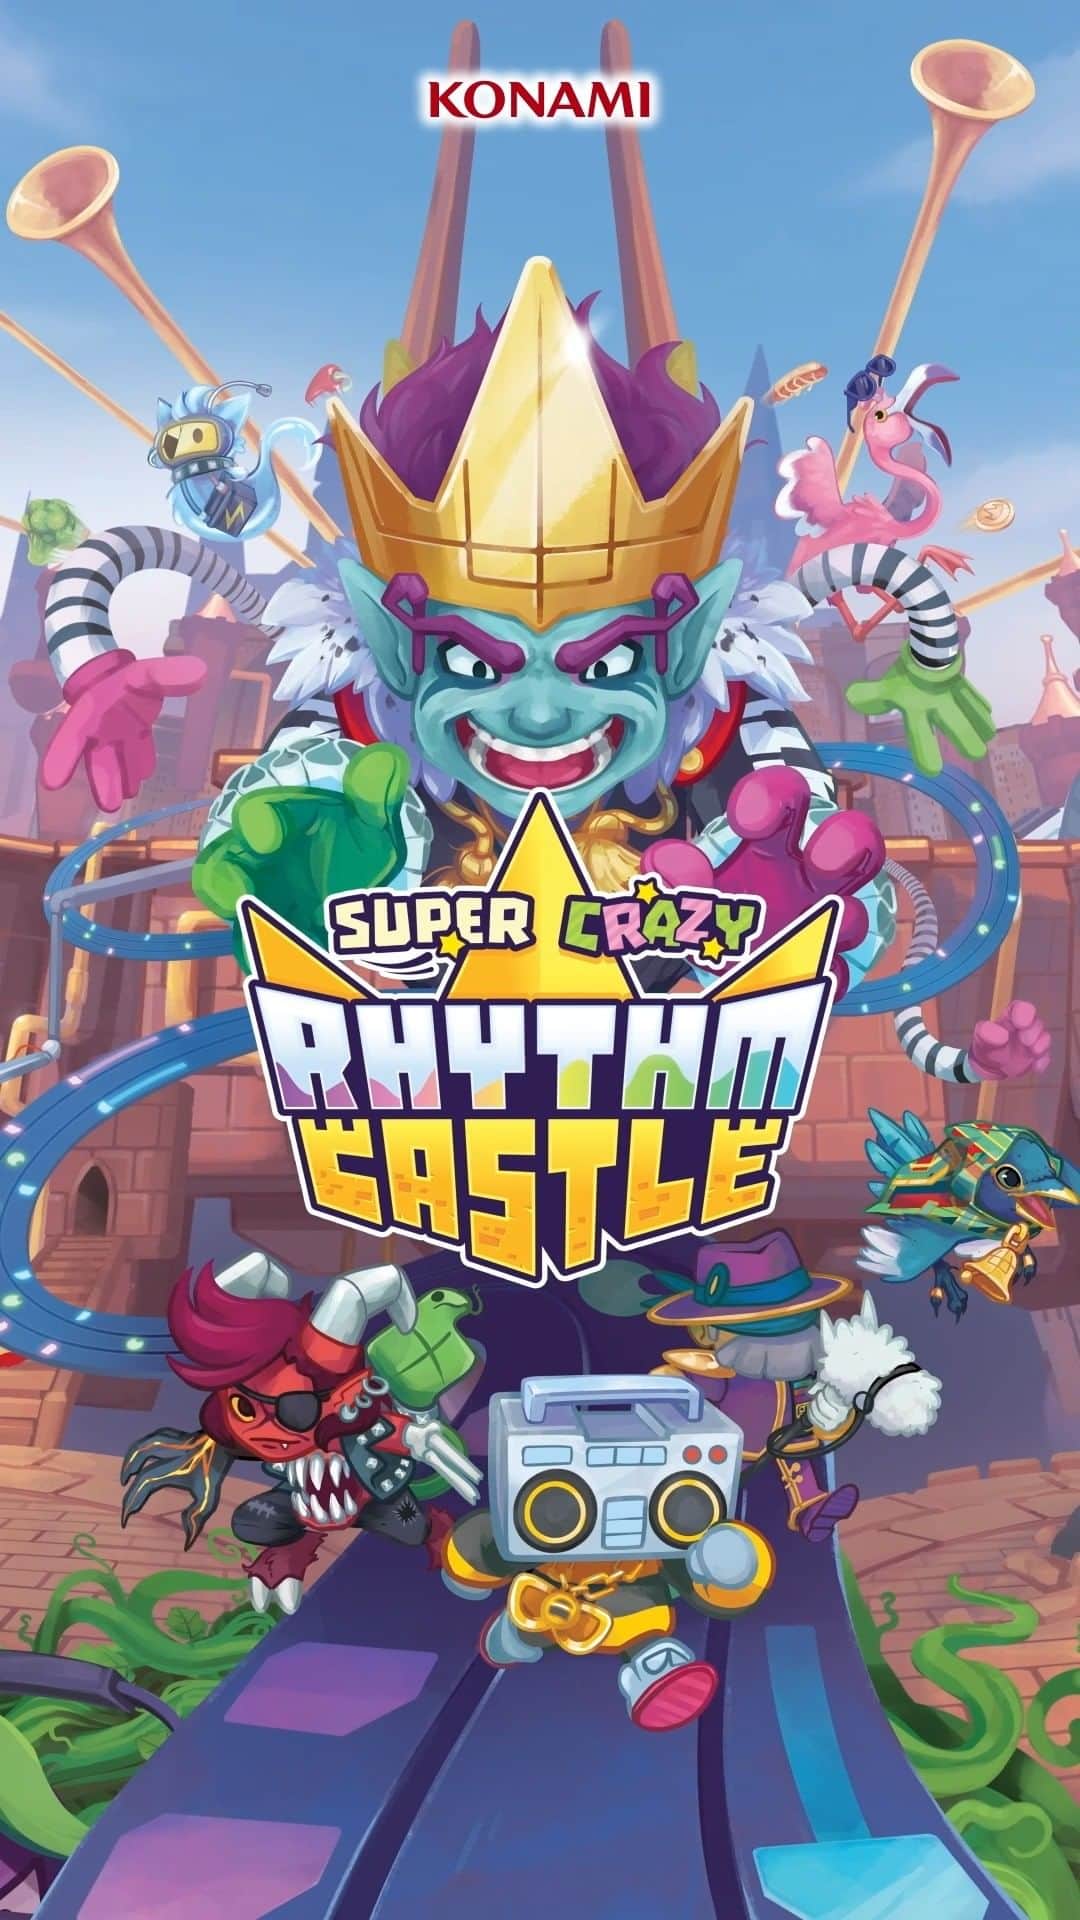 KONAMIのインスタグラム：「It’s Super Crazy Rhythm Castle, the chaotic rhythm adventure! 🎵   A puzzling co-op mashup unlike anything you've ever heard, Super Crazy Rhythm Castle mixes genres to take you on a unique adventure!   Check out the trailer!  #konami #konamigames #gaming」